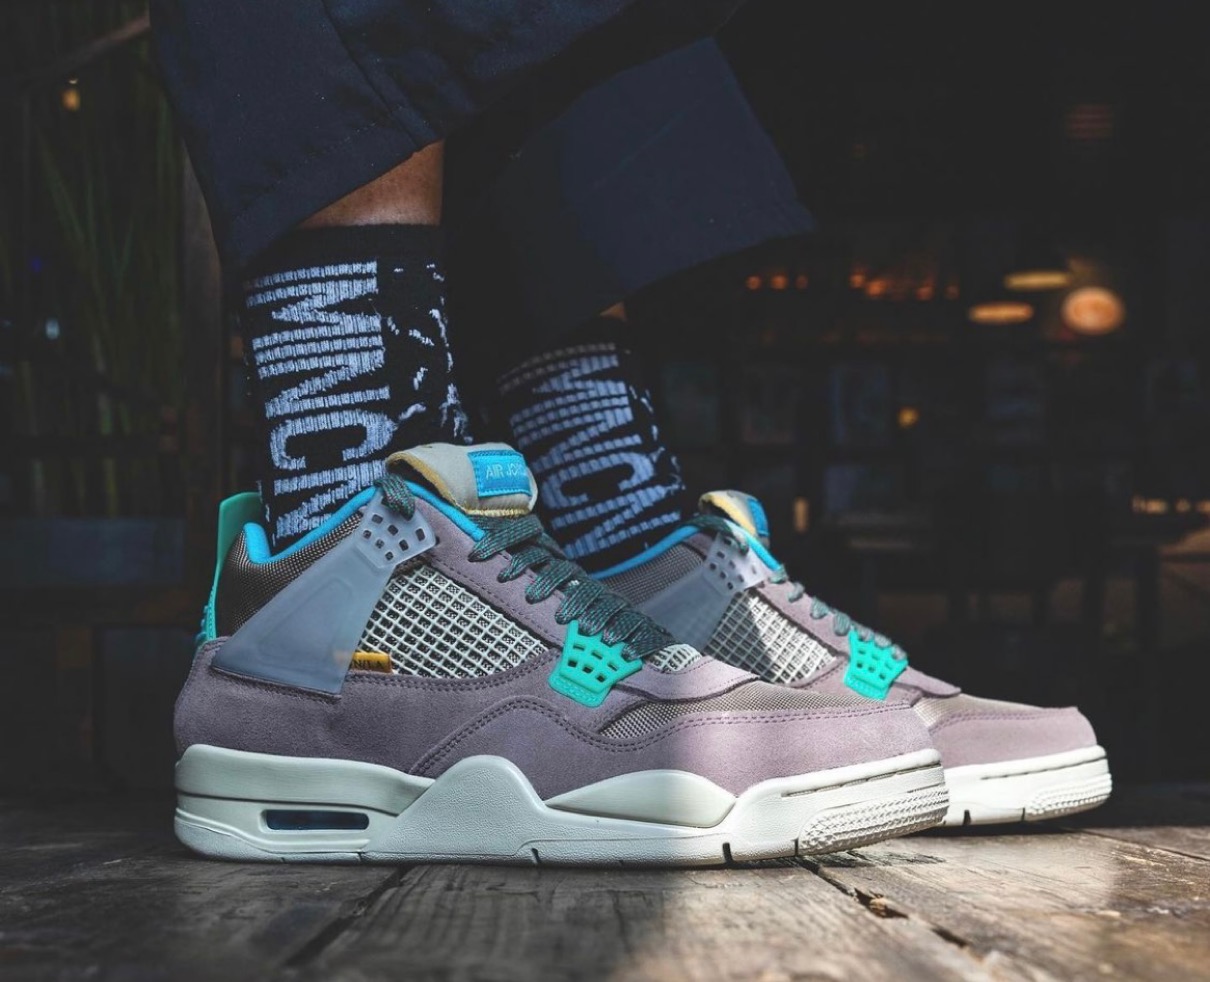 Union × Nike】Air Jordan 4 Retro SP “Tent and Trail” Collectionが ...